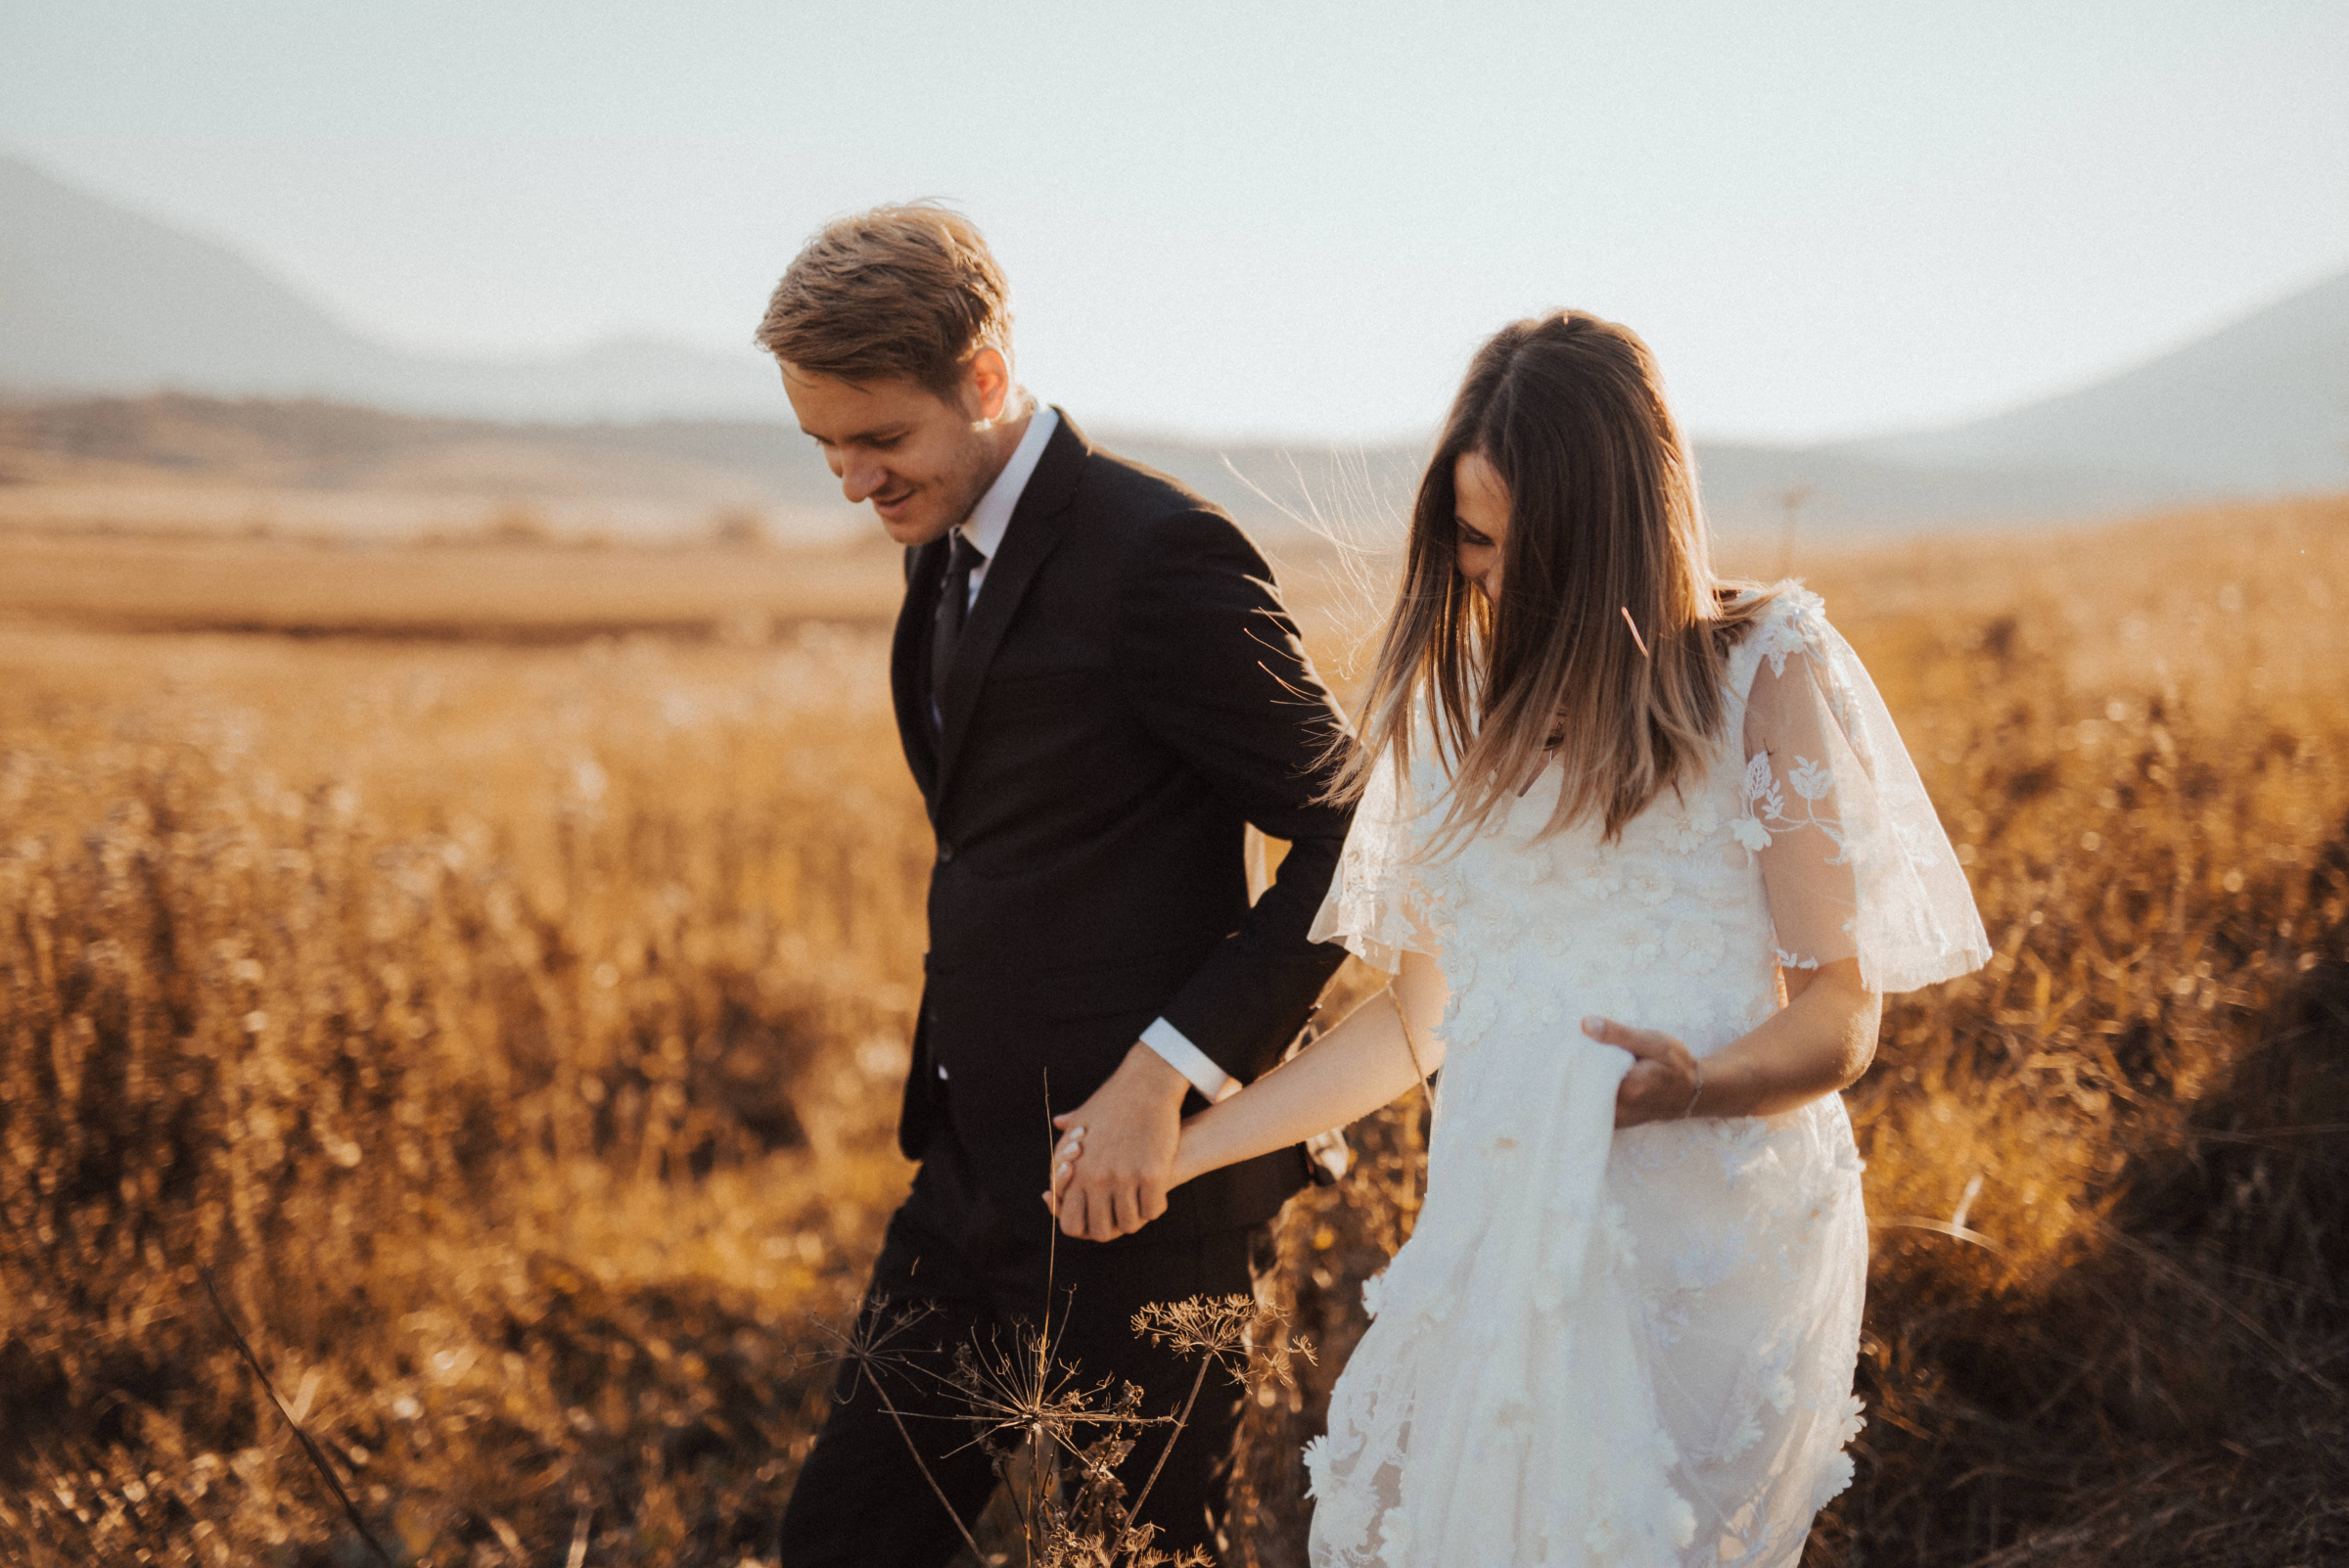 A bride and groom walking through a field. | Source: Pexels